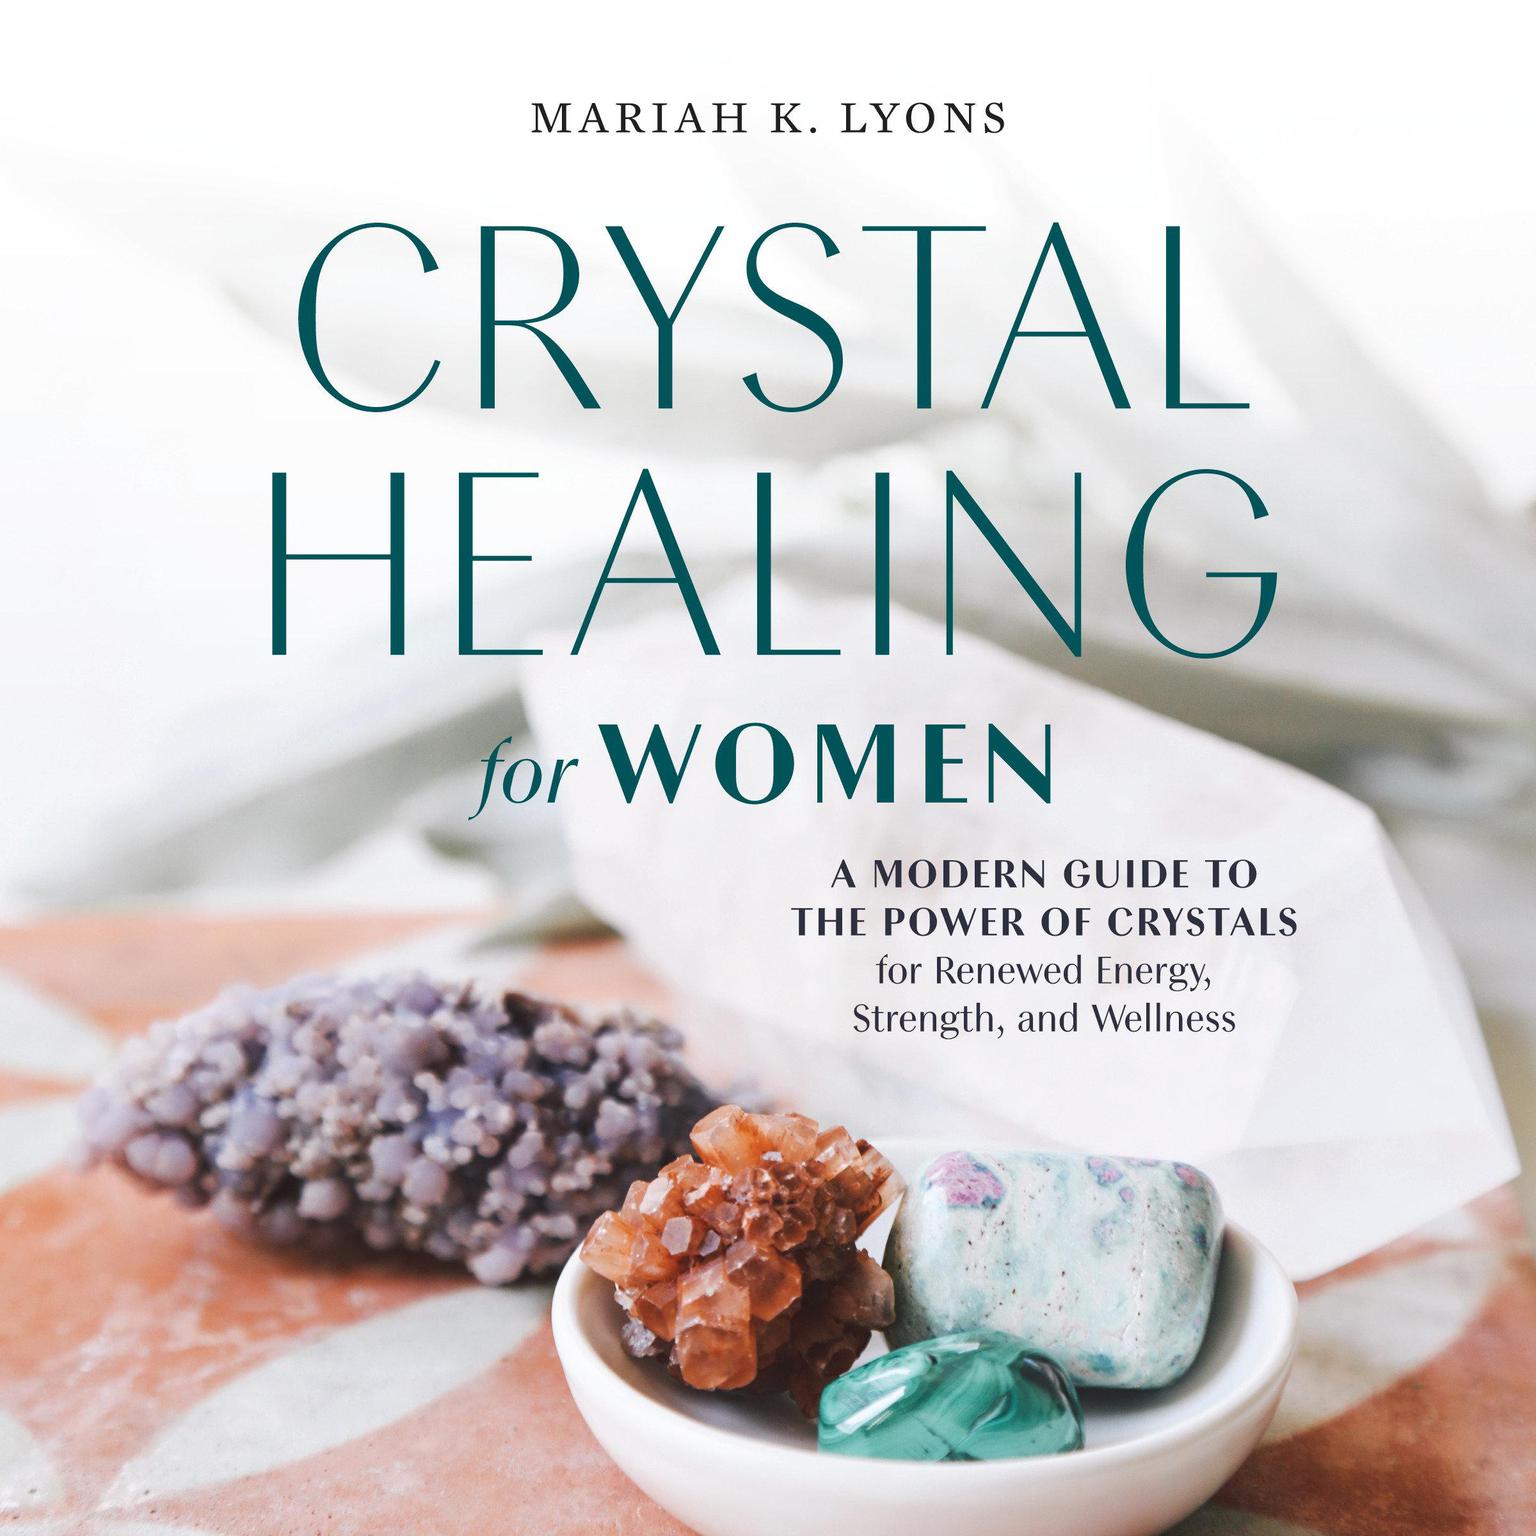 Crystal Healing for Women: A Modern Guide to the Power of Crystals for Renewed Energy, Strength, and Wellness Audiobook, by Mariah K. Lyons